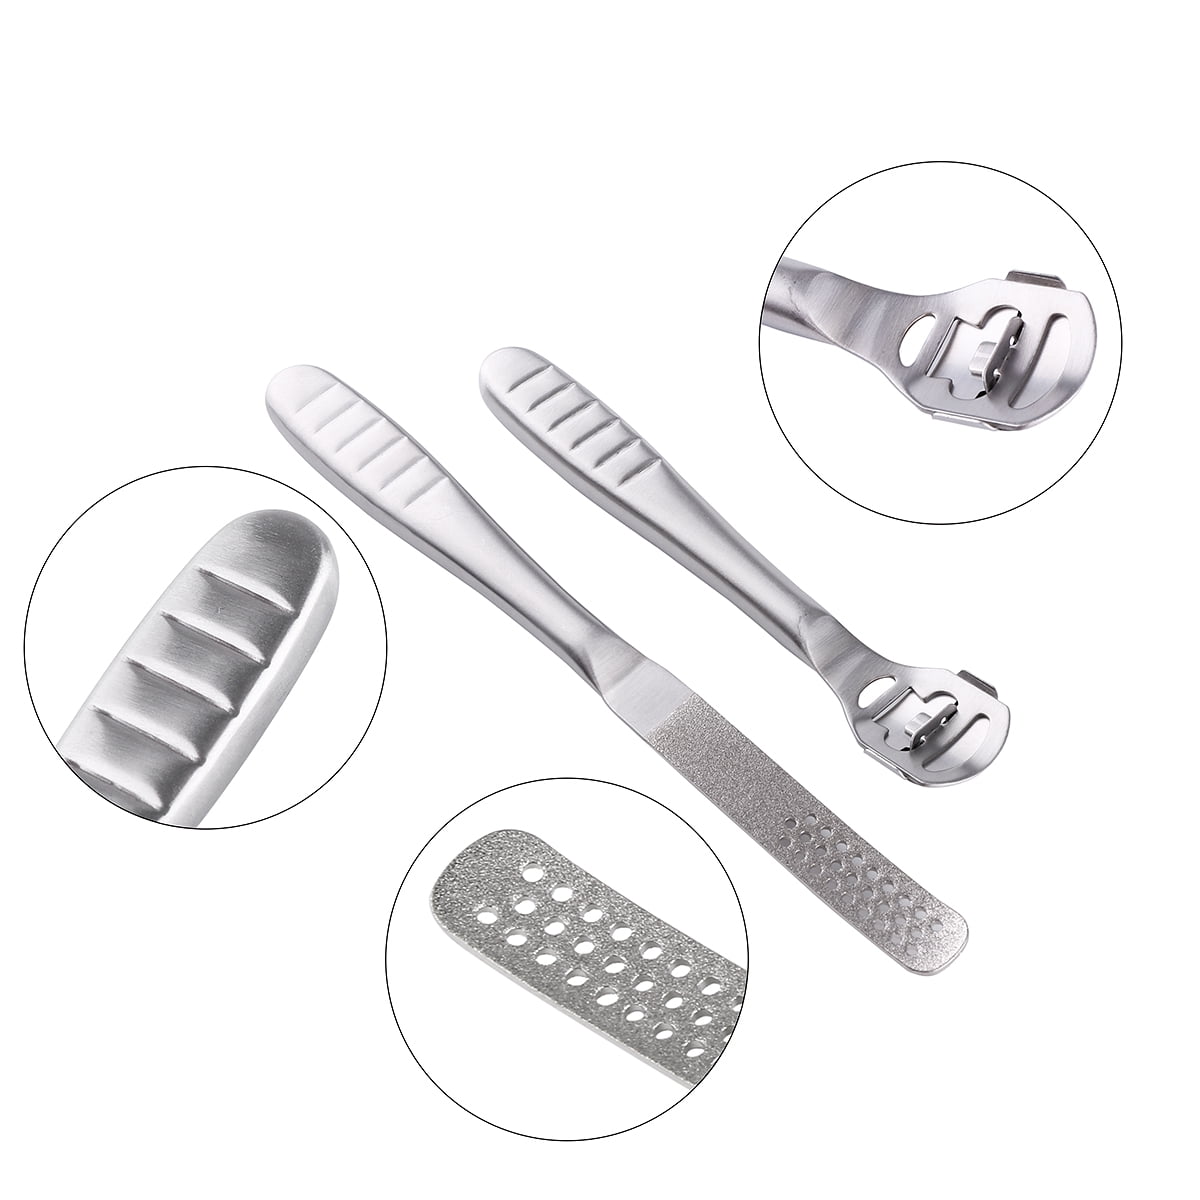 Stainless Steel Foot Dead Skin Remove Tool Planer Sharp Pedicure Remove  Dead Skin Scraping Knife Calluses Scraper Foot Care Tool2578459 From Jjdl,  $11.22